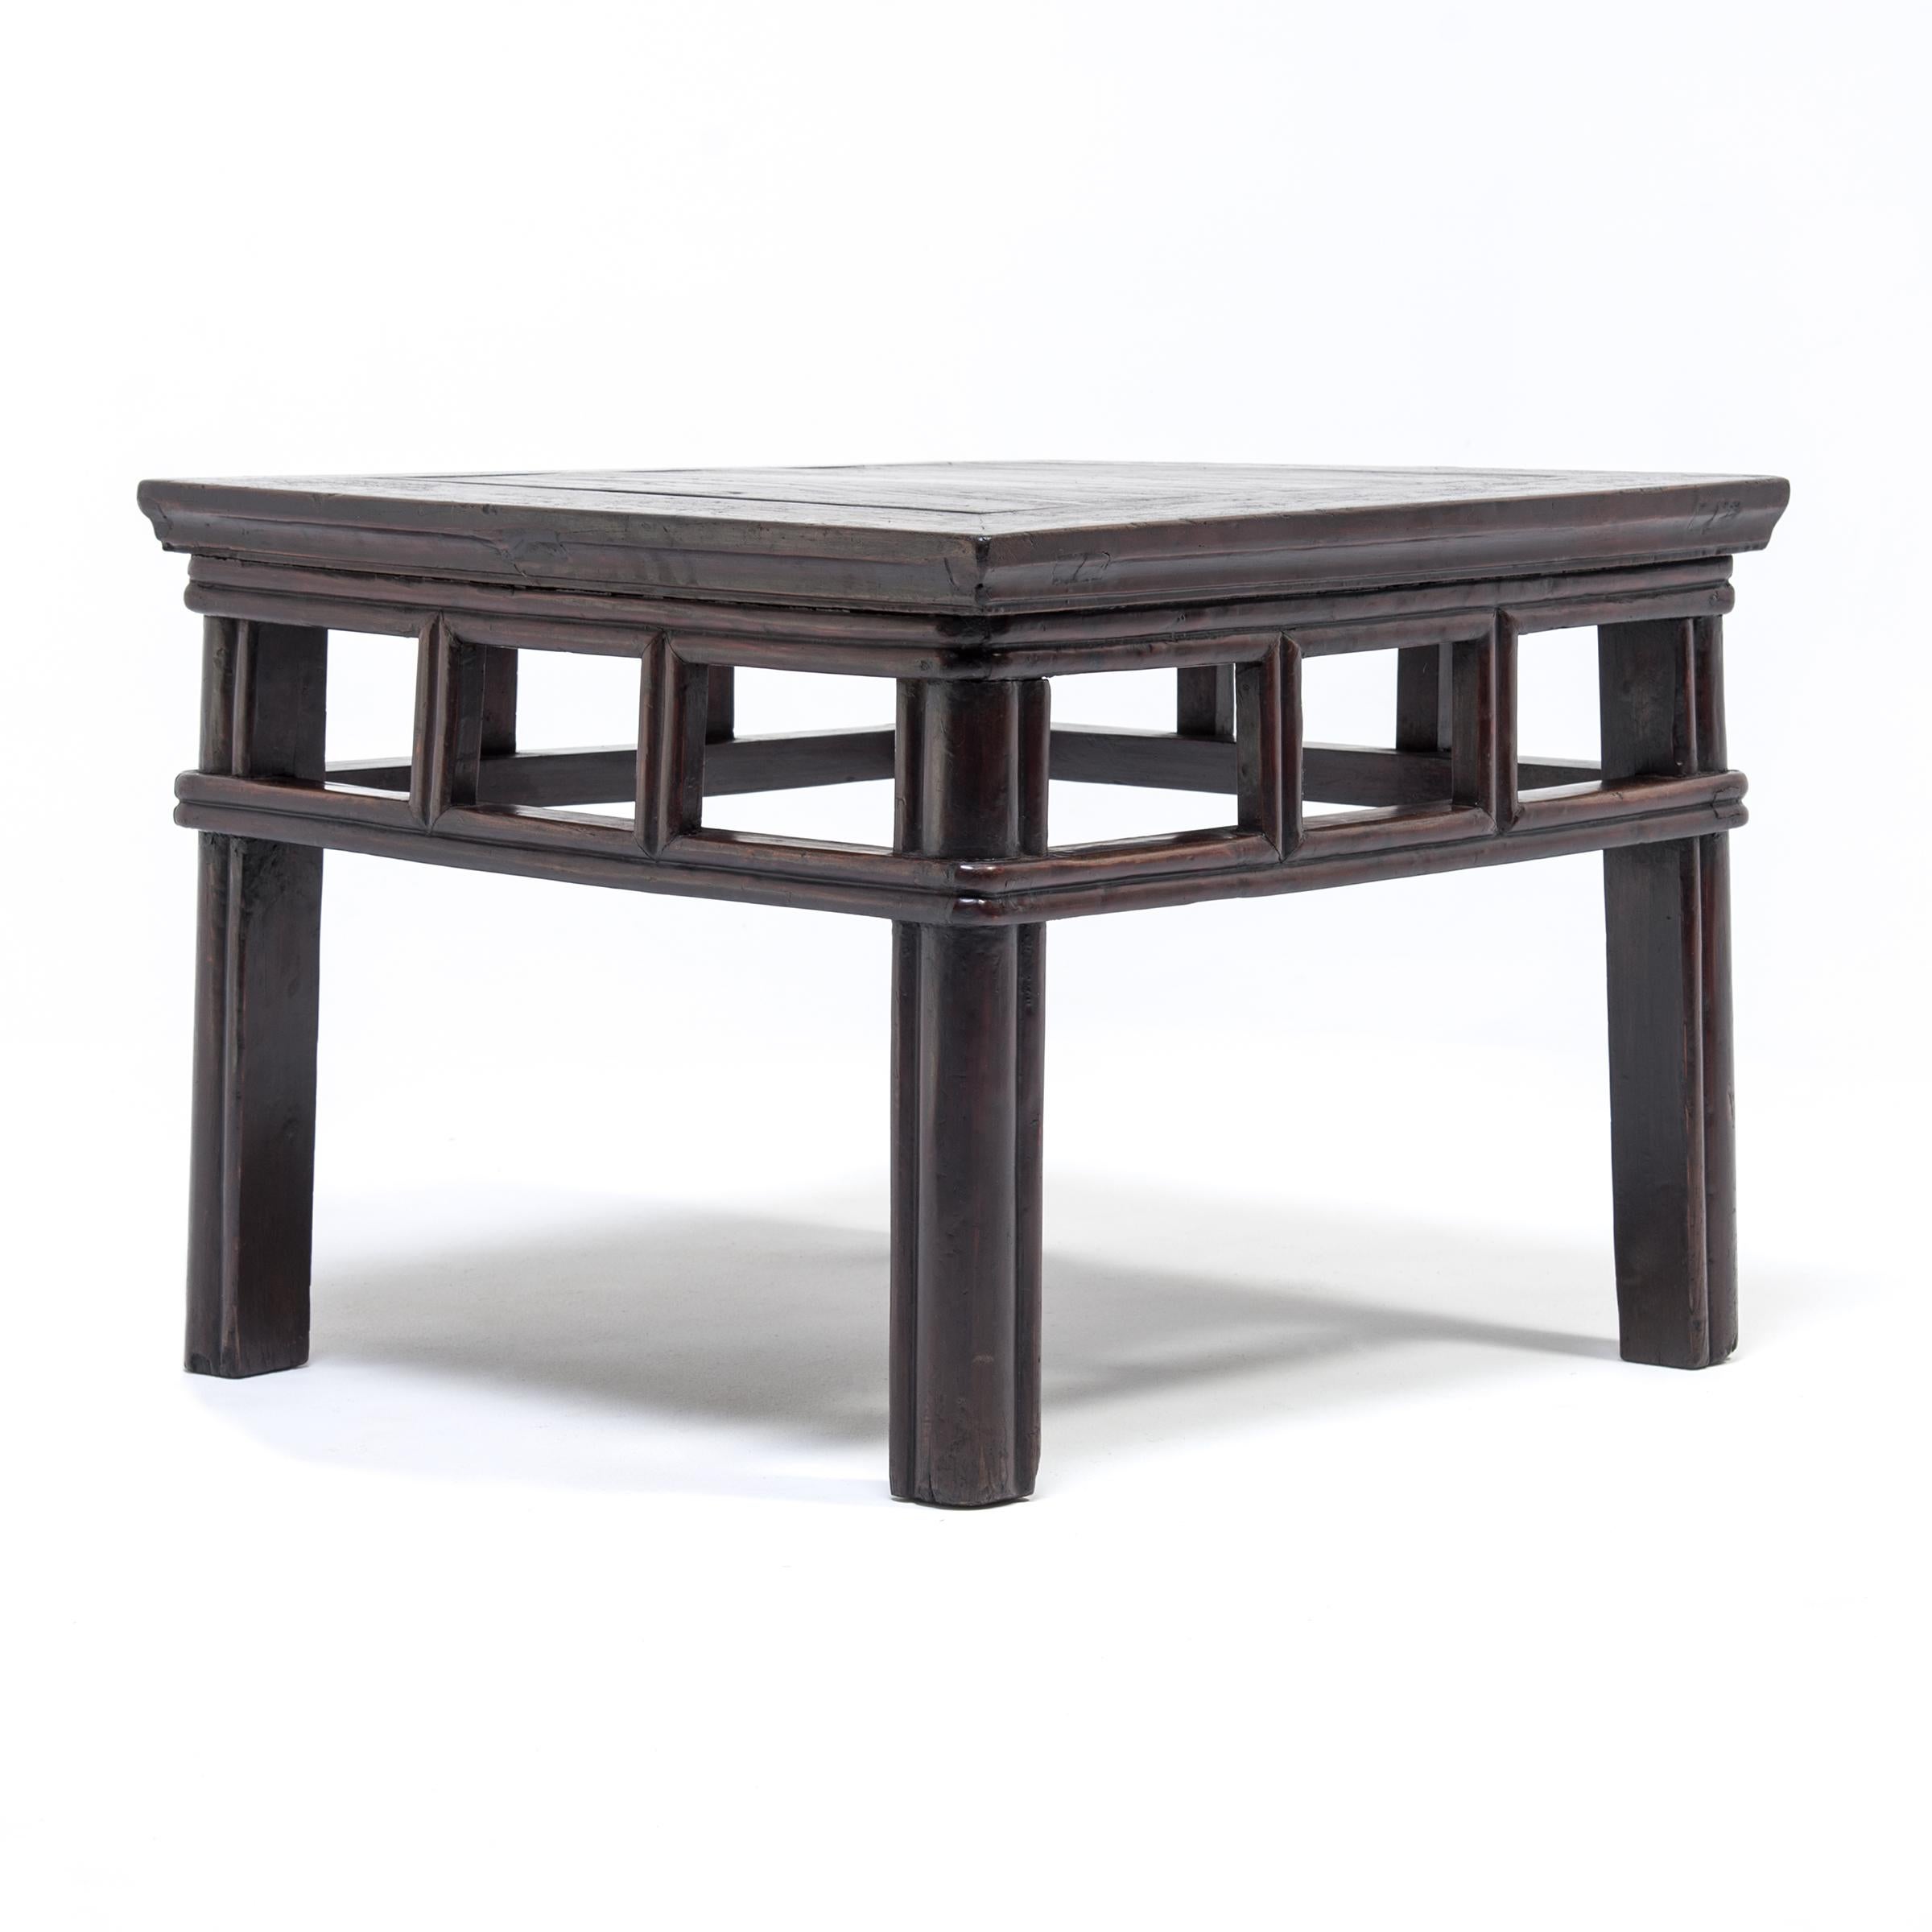 Lacquered Chinese Black Lacquer Square Stool, c. 1850 For Sale